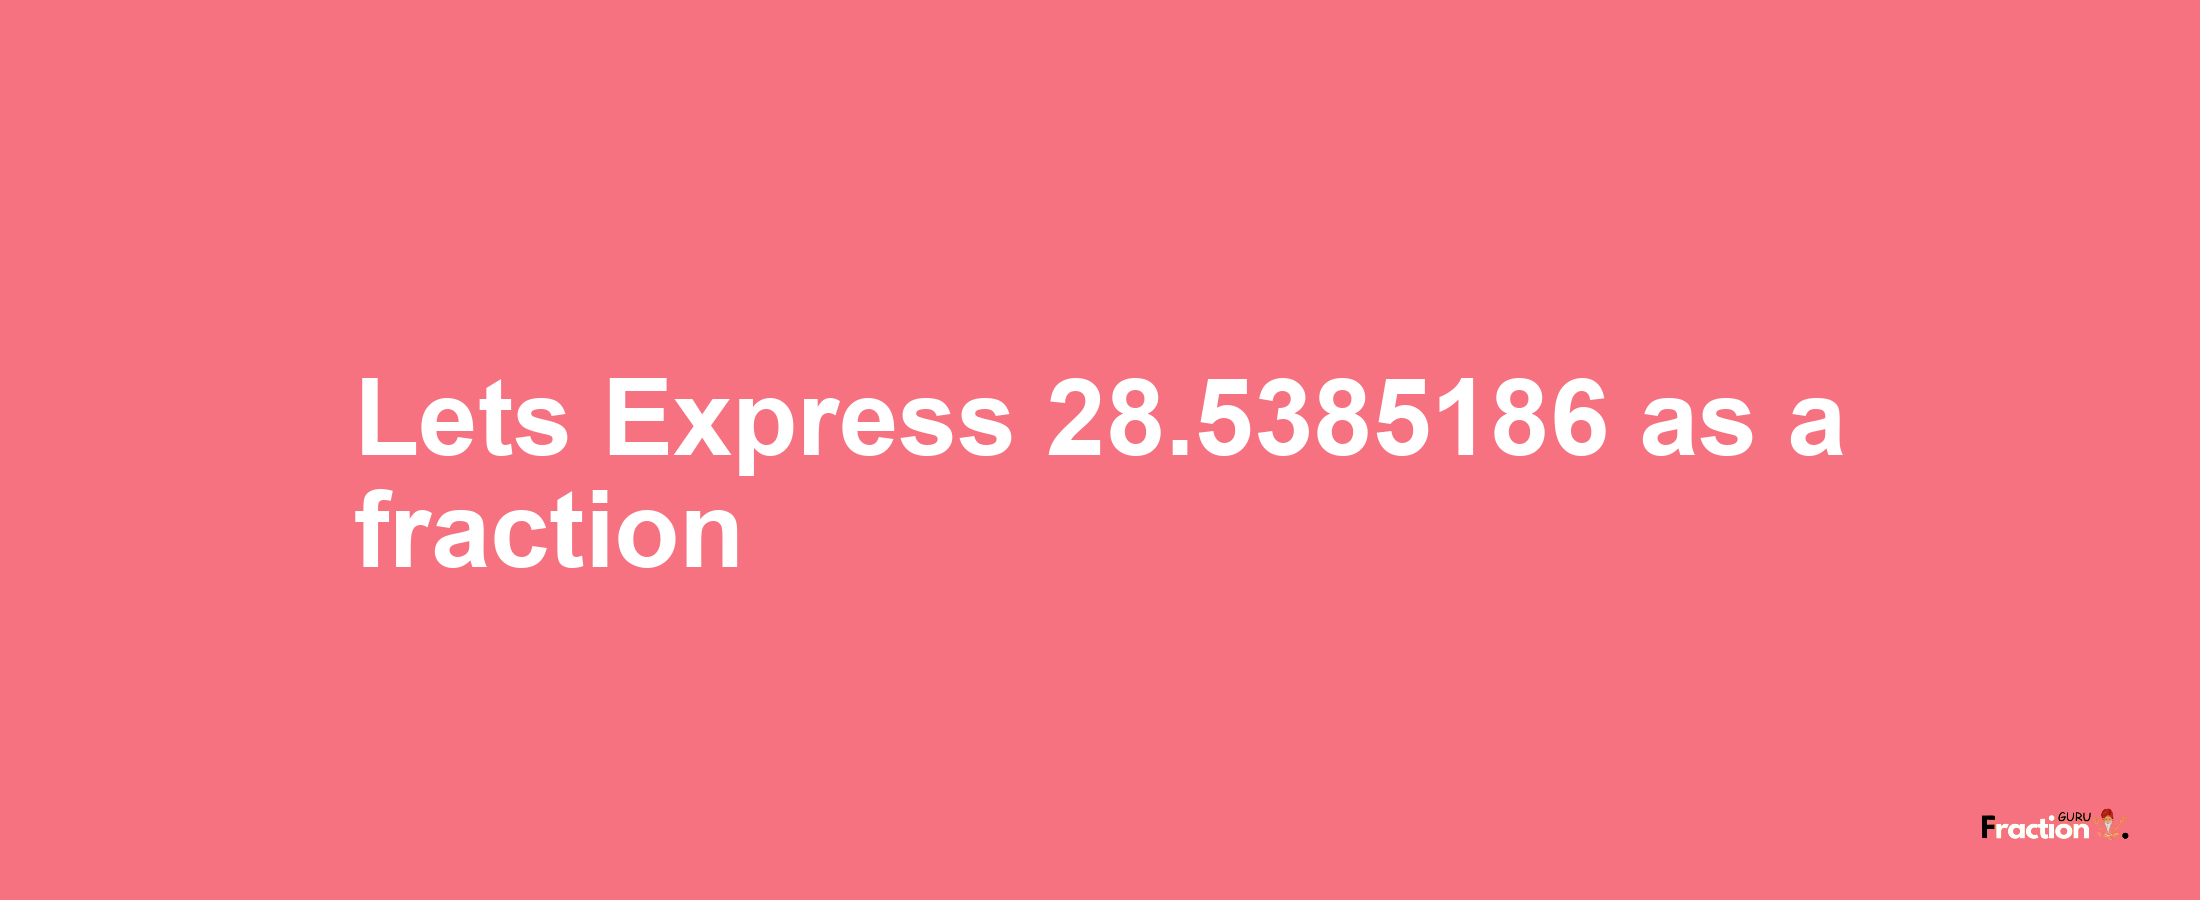 Lets Express 28.5385186 as afraction